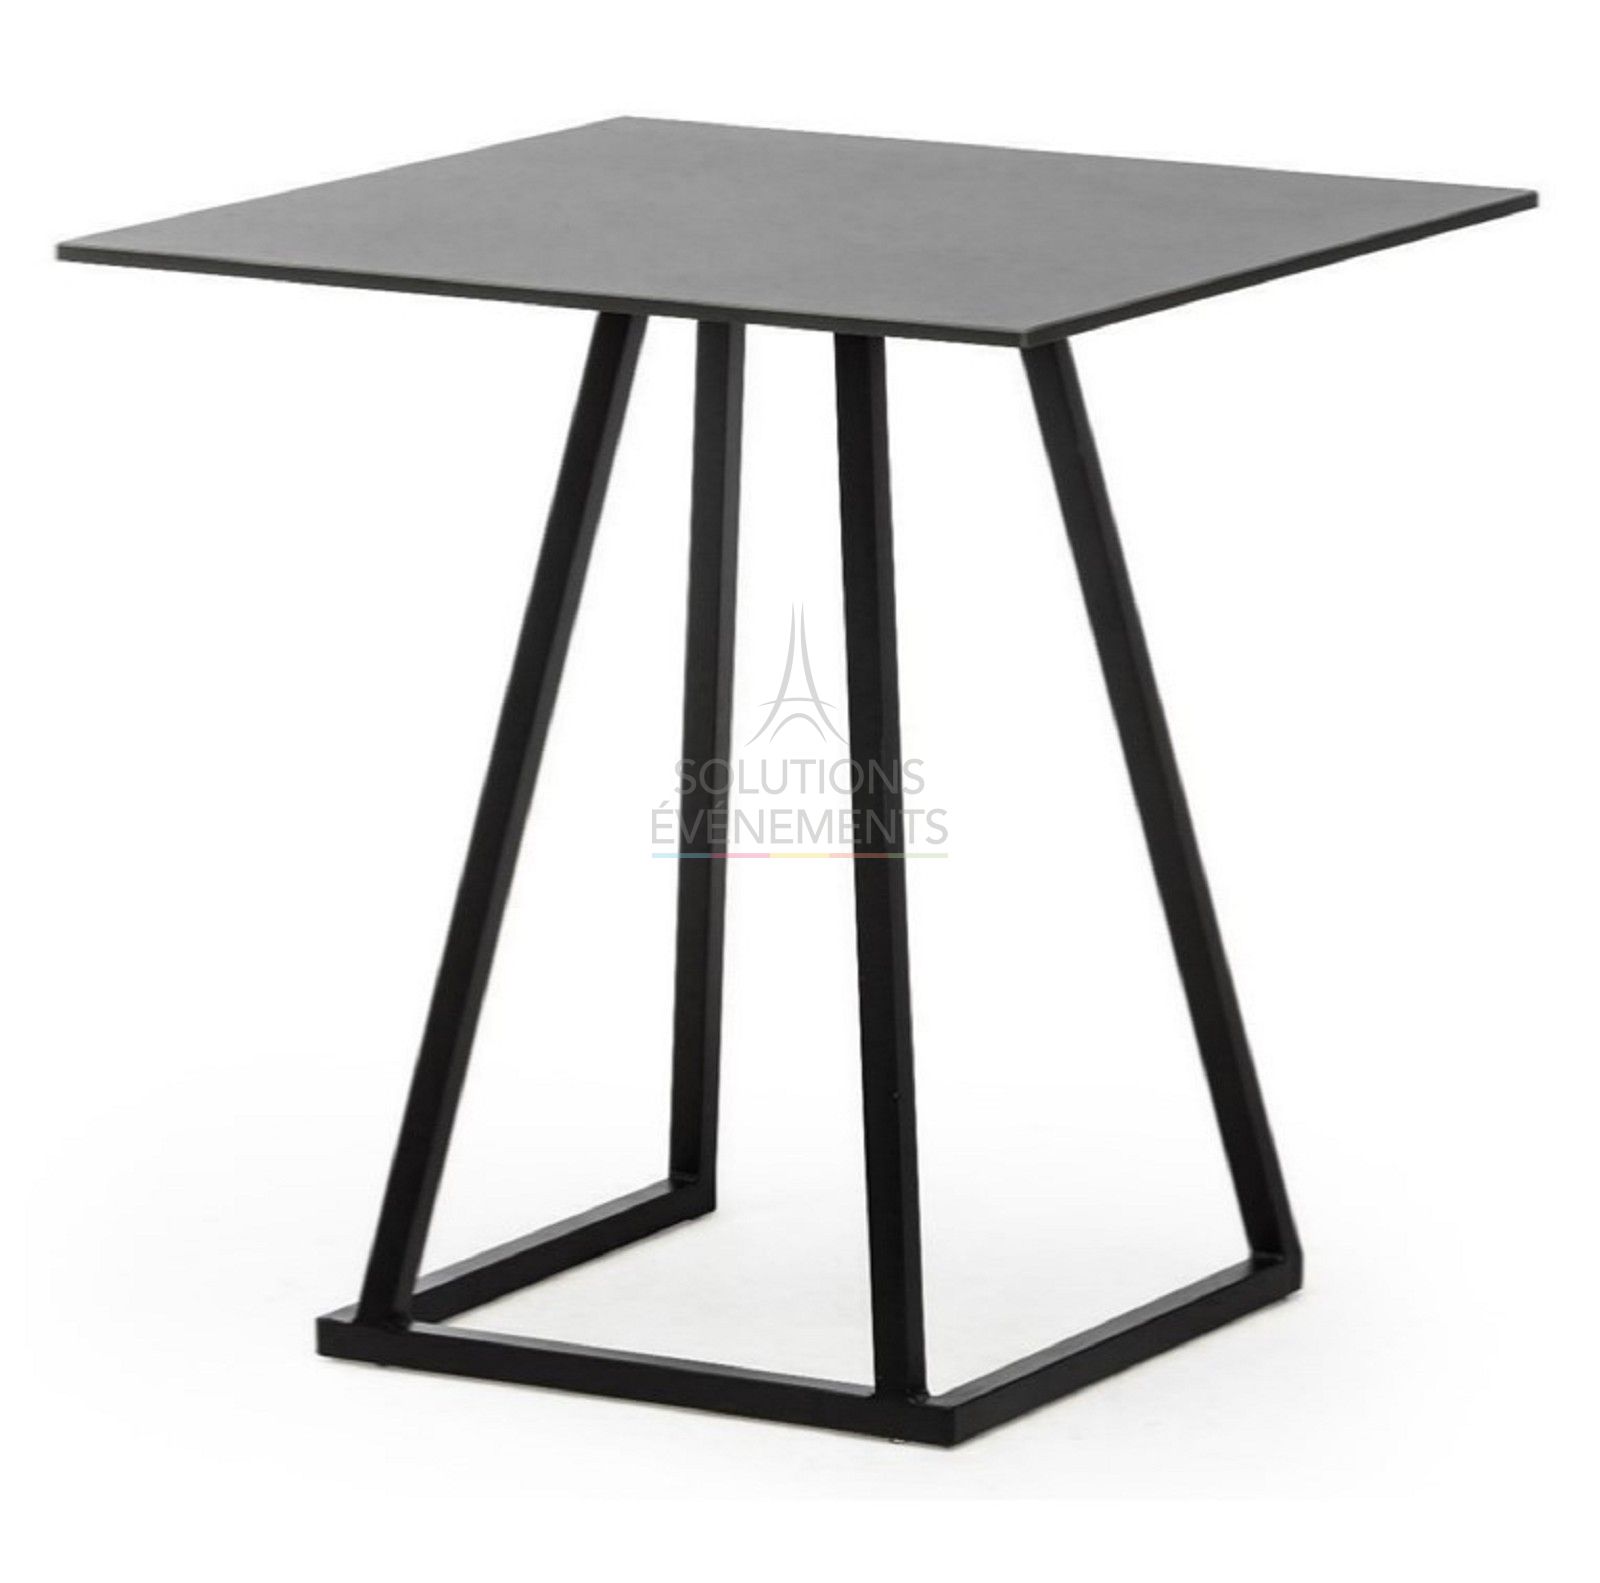 Rental of small pedestal table with square top.